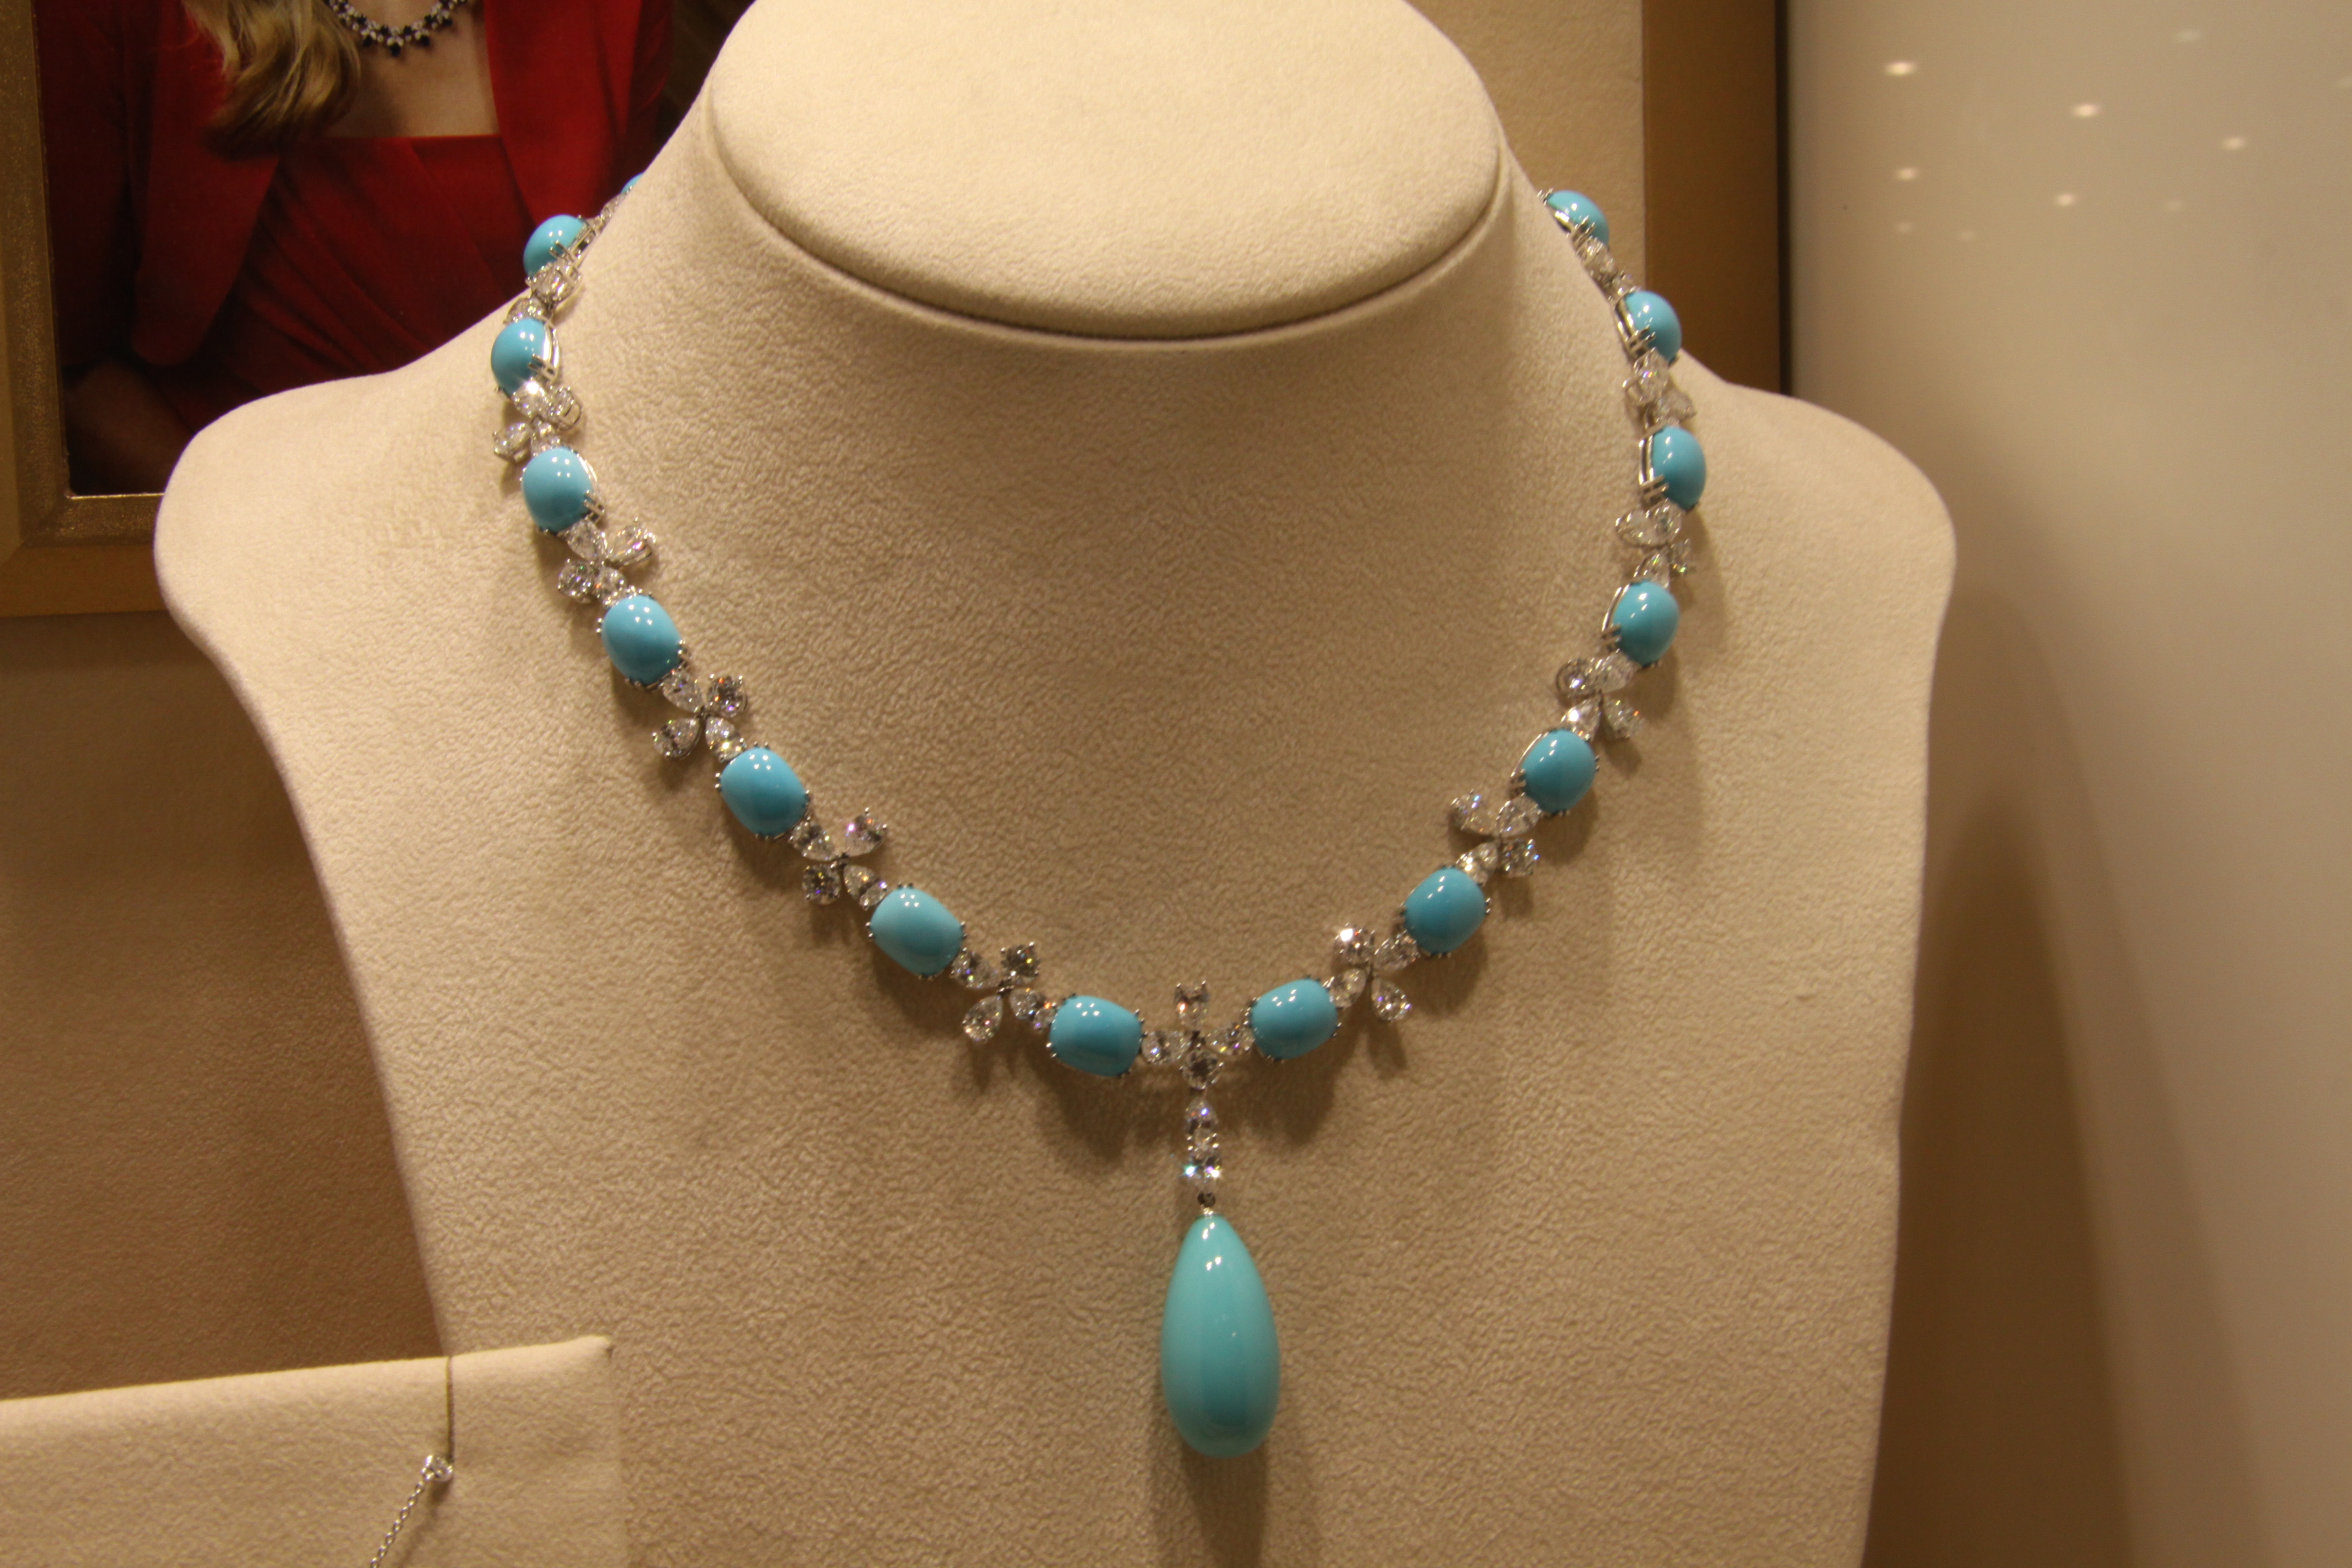 Sleeping beauty turquoise and diamonds necklace, Istanboulli Gioielli